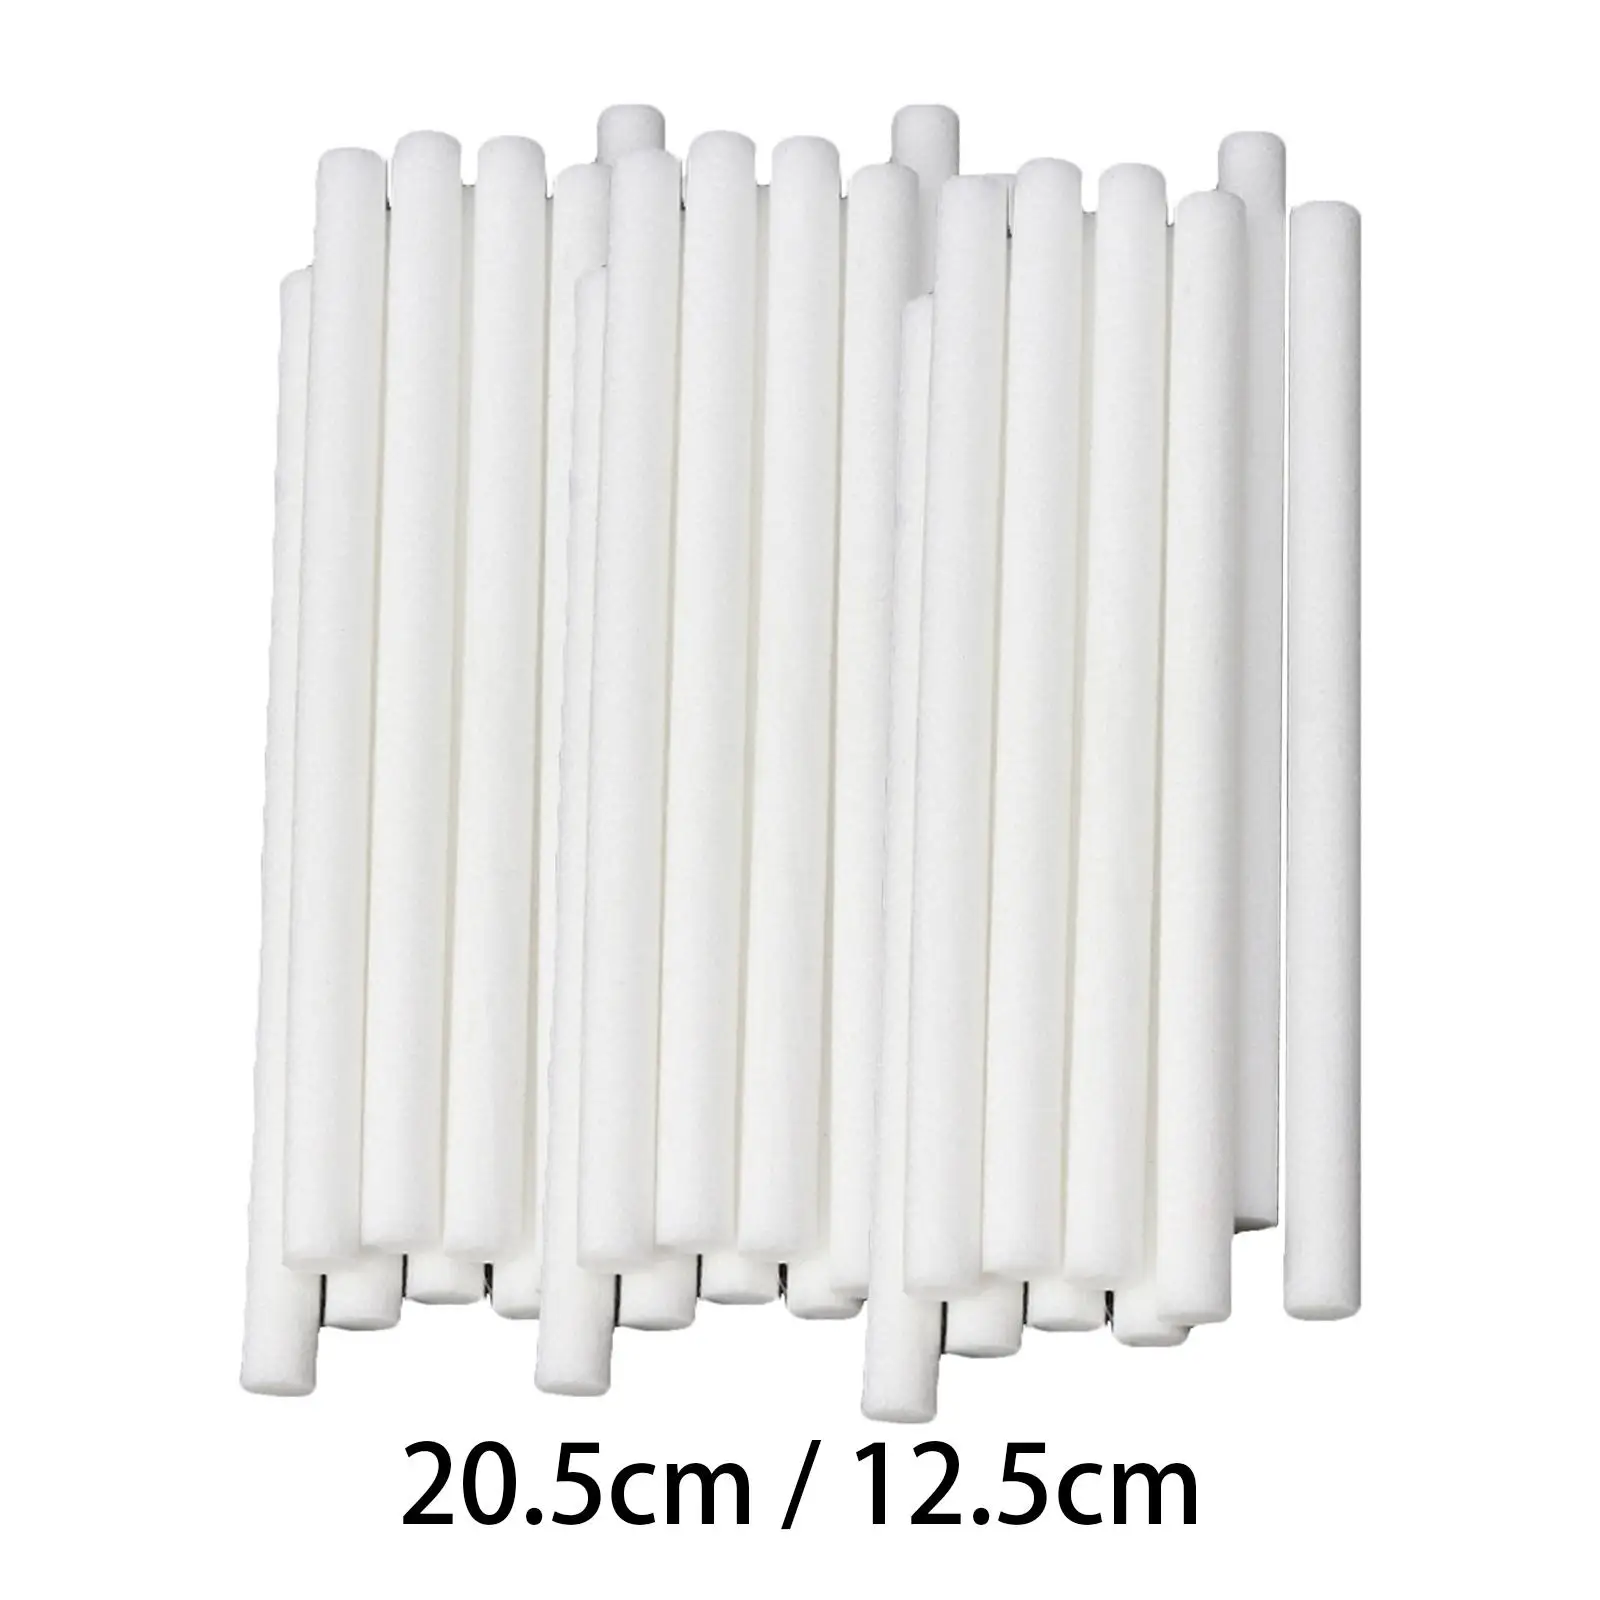 Car Diffuser Sponges Refill Sticks for Cool Mist Humidifiers Travel Home